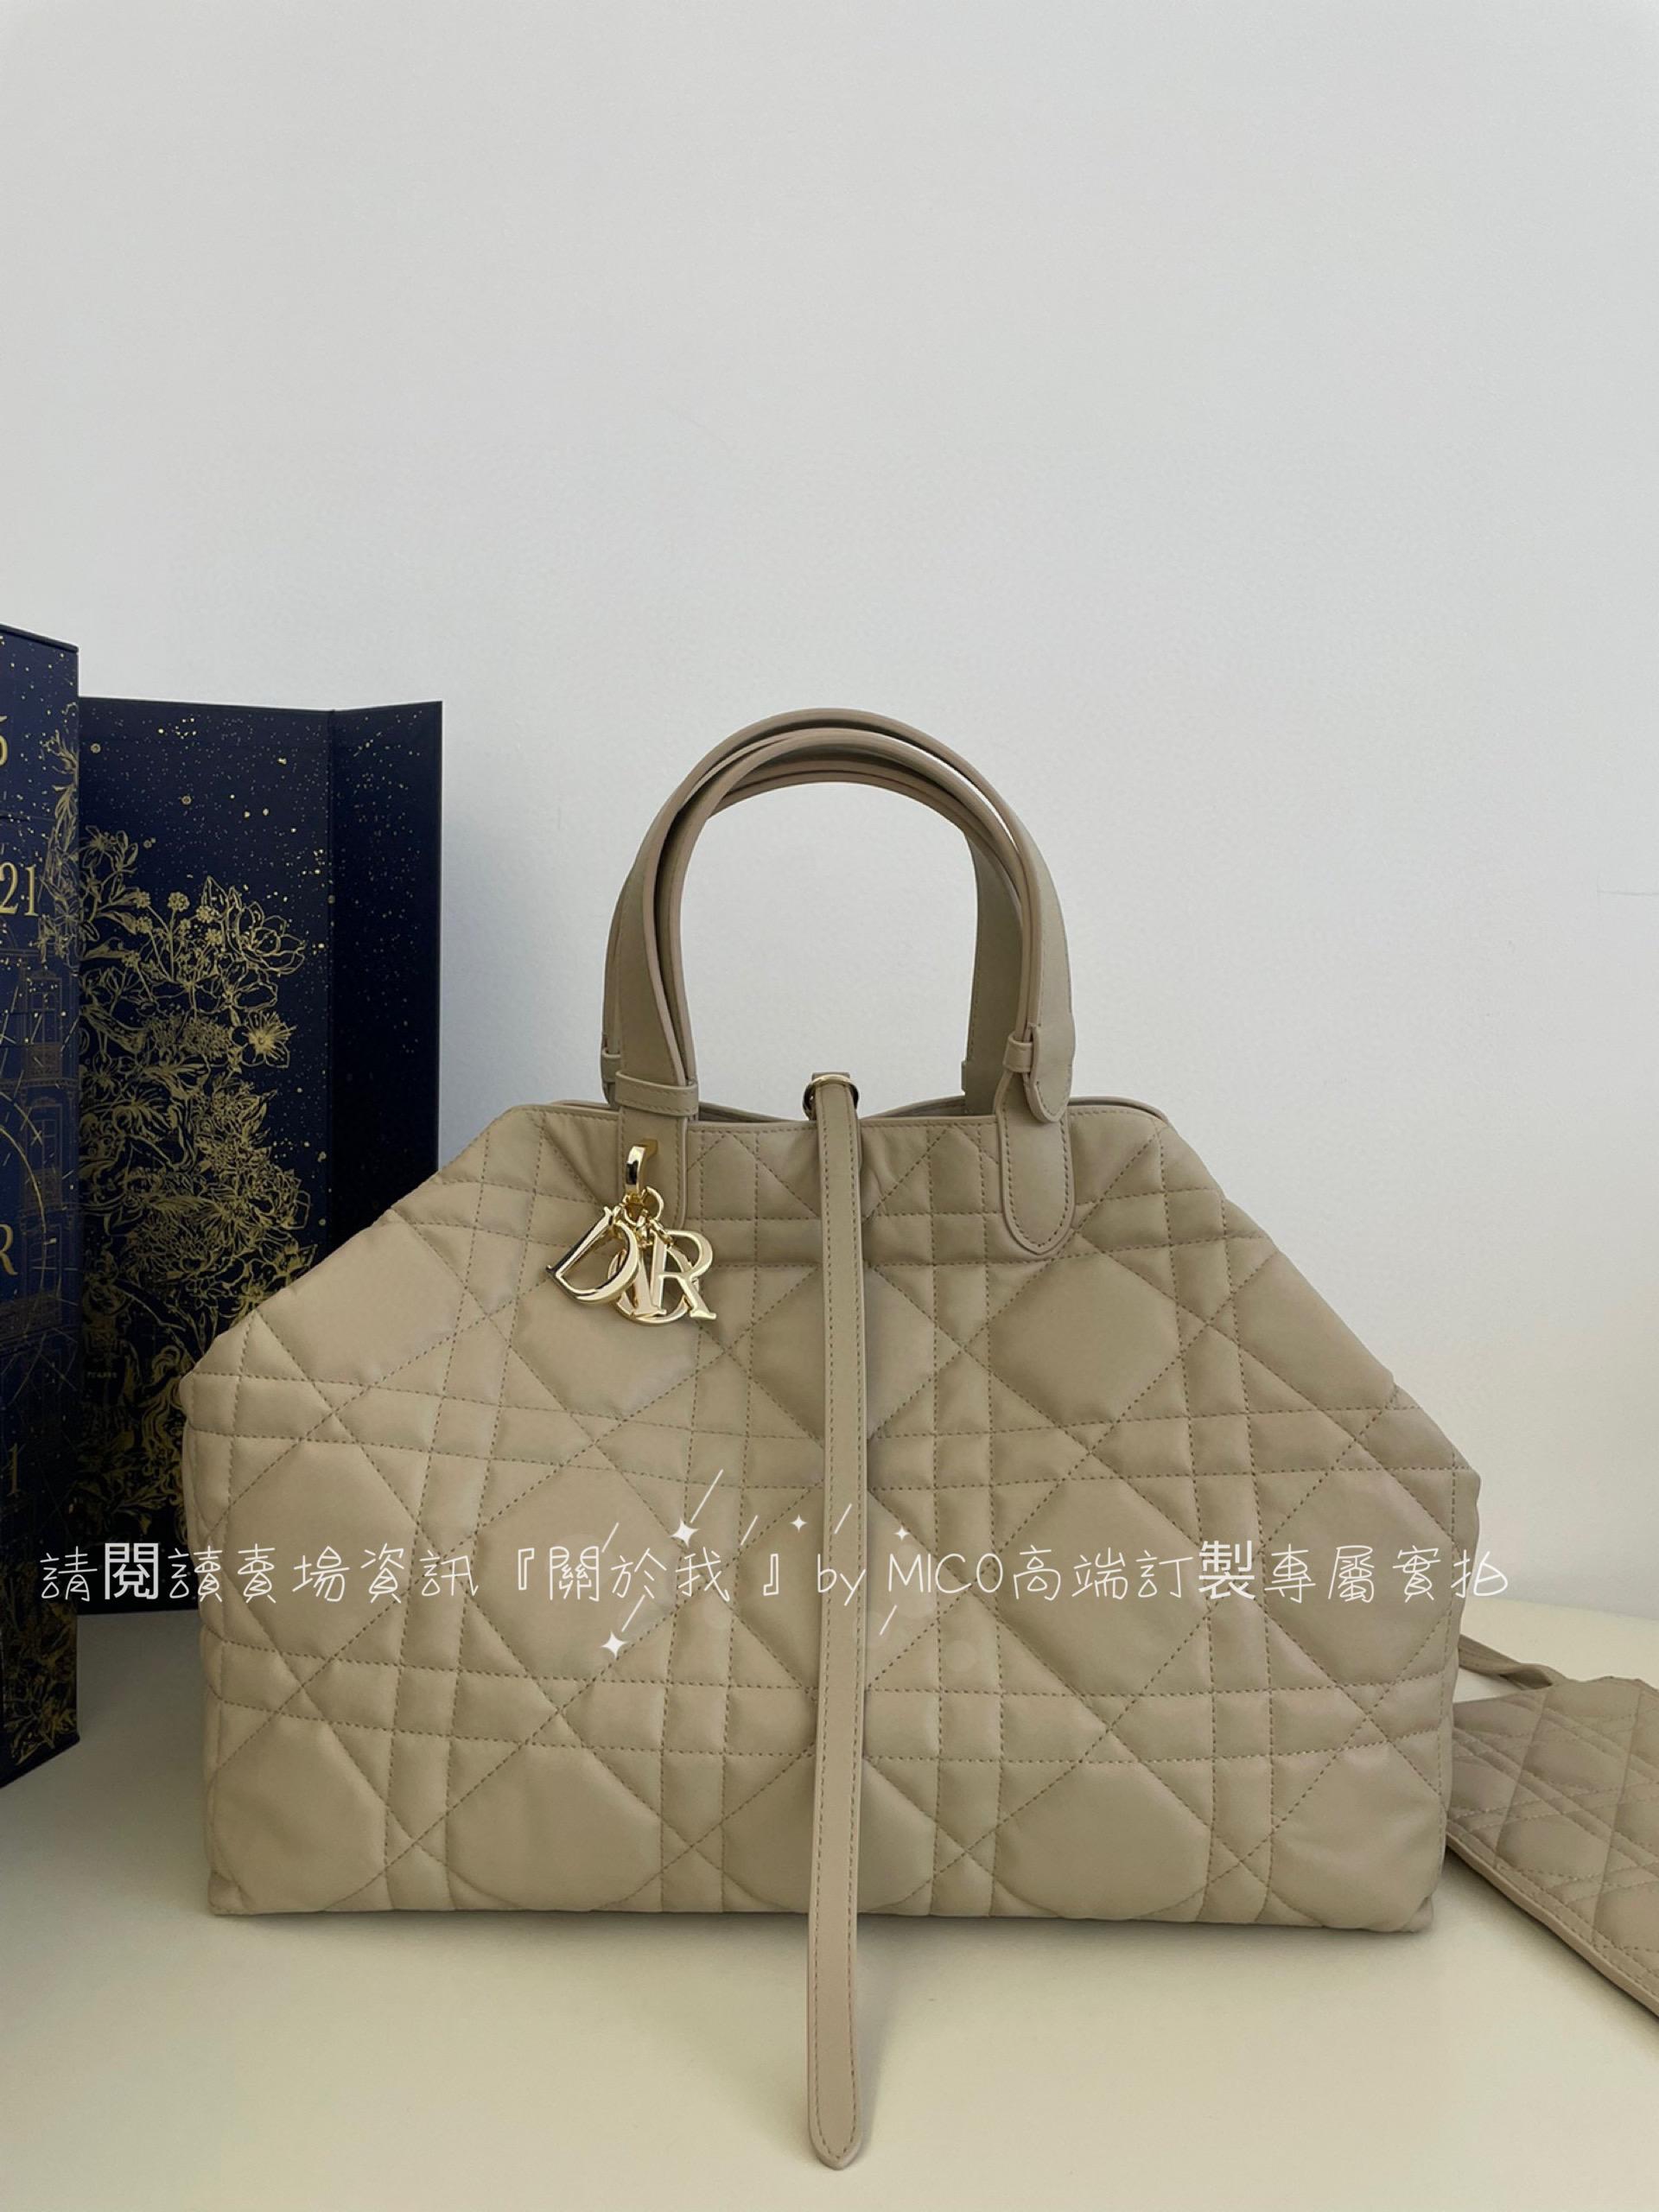 DIOR 大號/奶油杏色 Toujours 小牛皮 size:37*20*28.5cm 